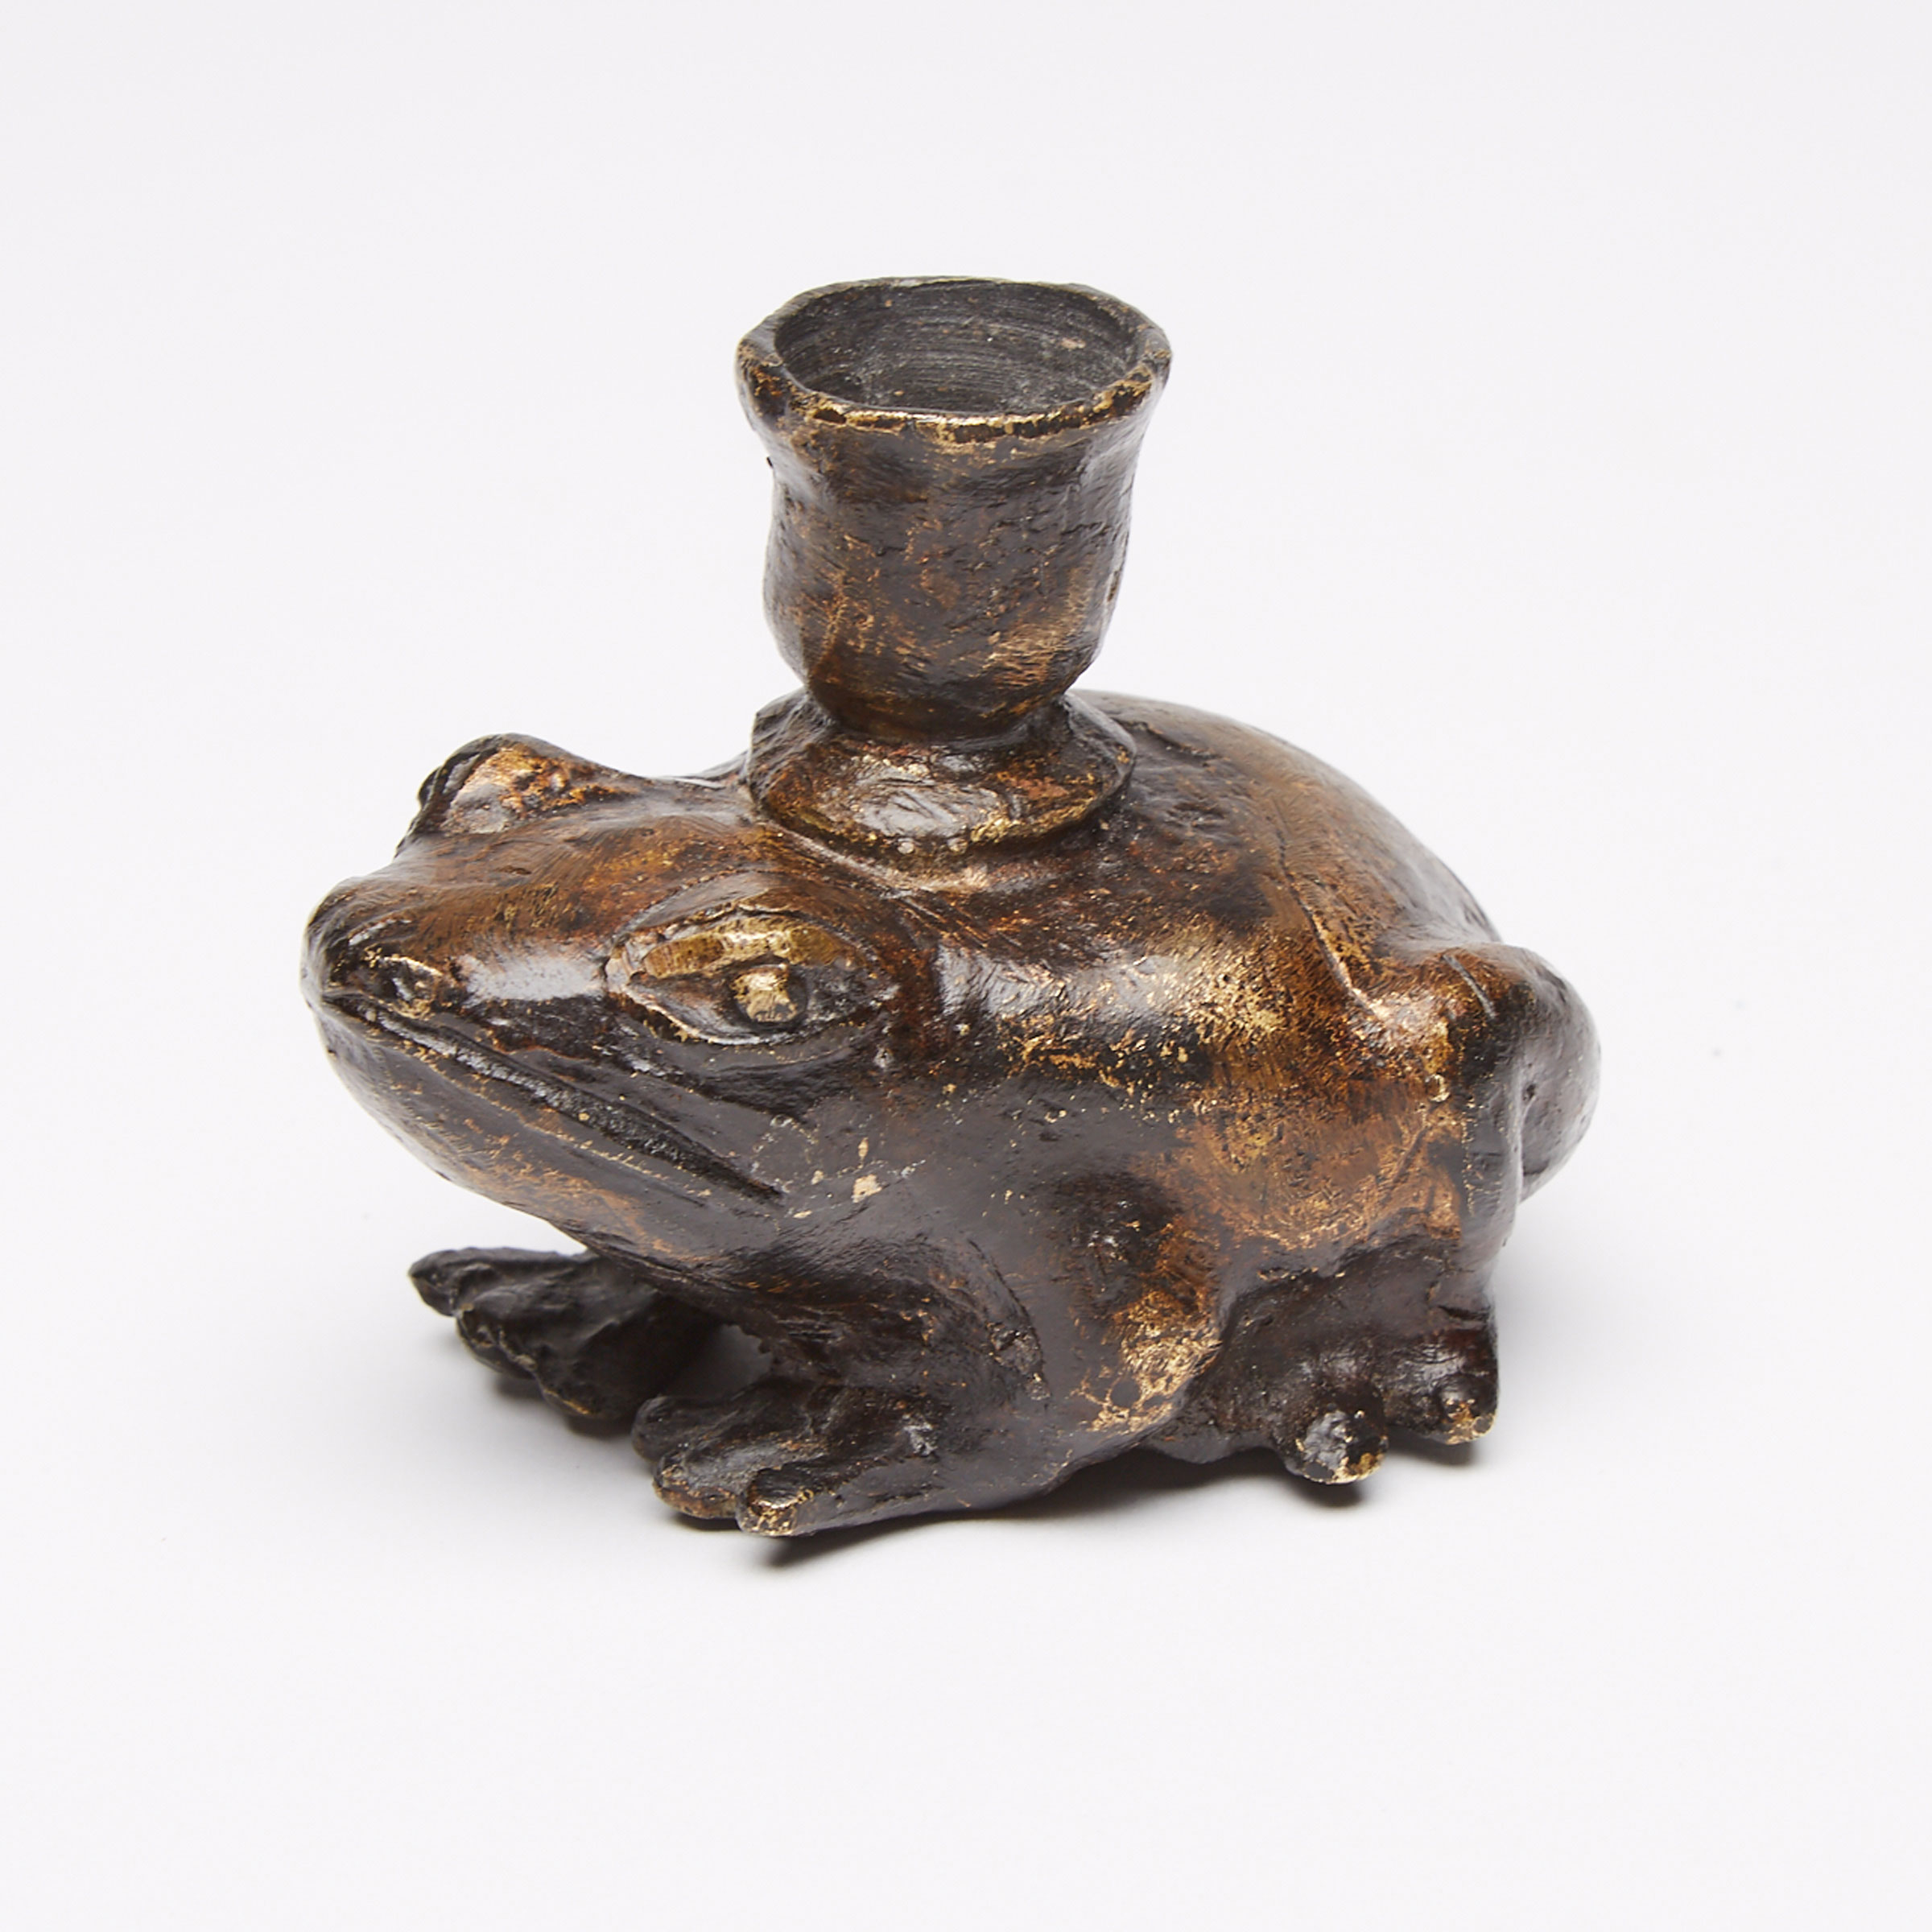 Paduan Bronze Toad Form Candle Holder, 16th century